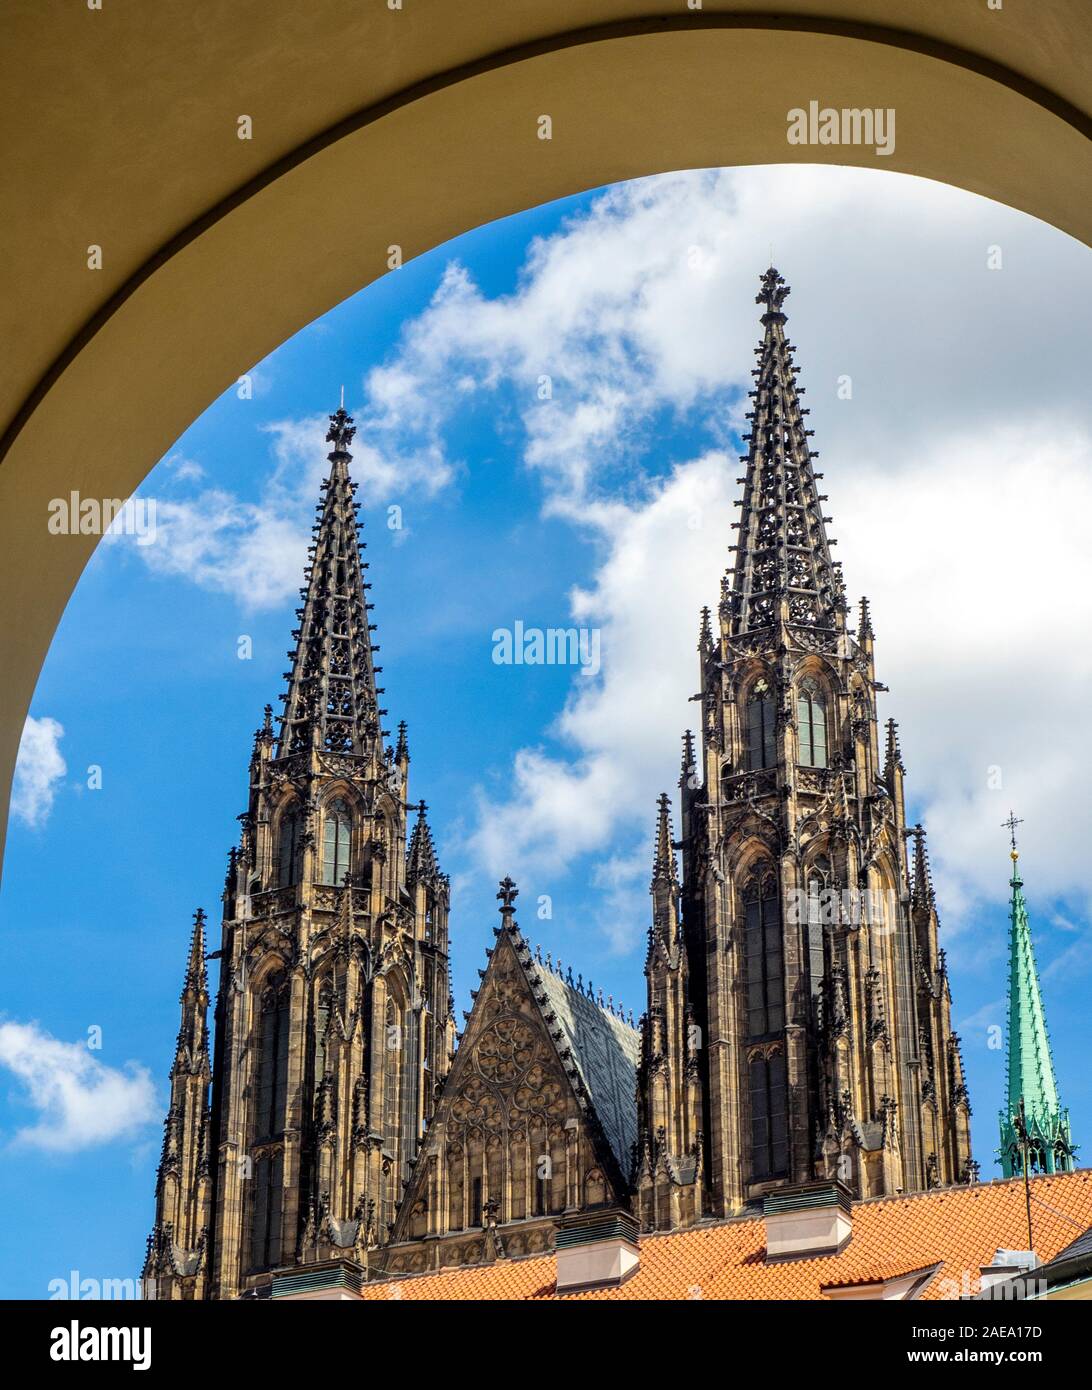 St Vitus Cathedral Gothic steeples and peak of Great Southern Tower seen from portico of Royal Palace Prague Castle Complex Prague Czech Republic. Stock Photo